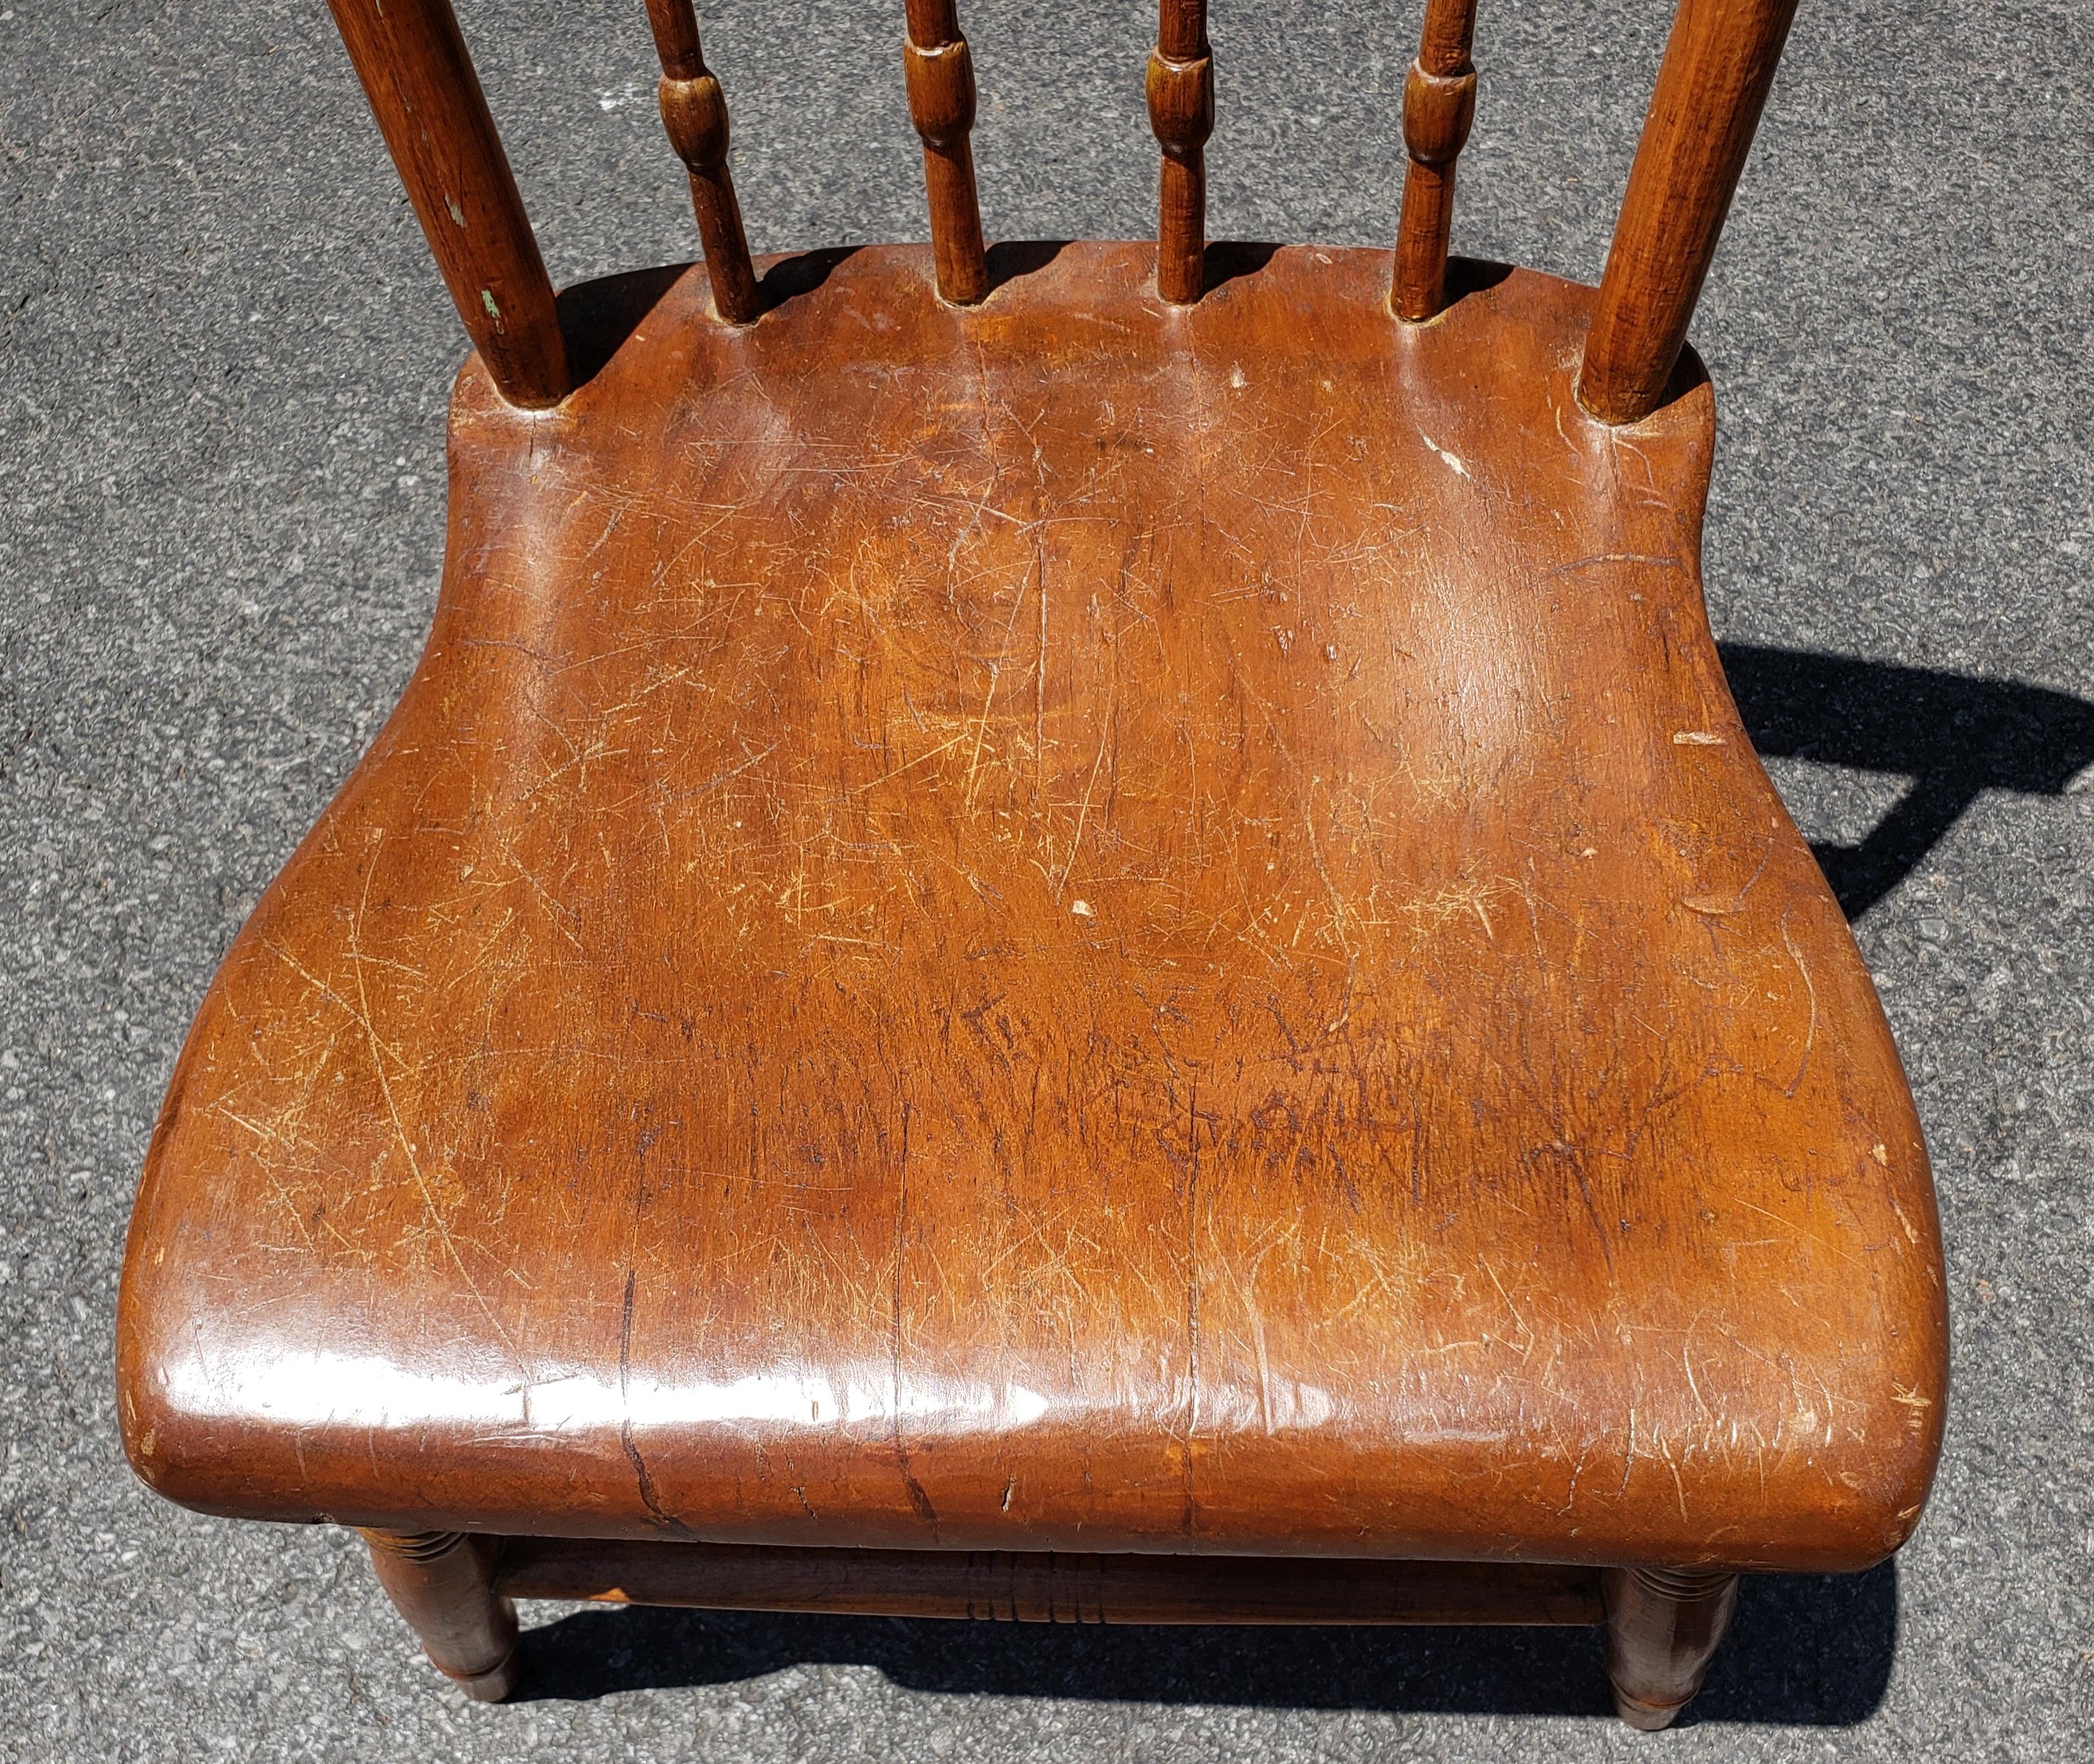 Hand-Crafted Late 19th Century Early American  HandCrafted Maple Plank Chair For Sale